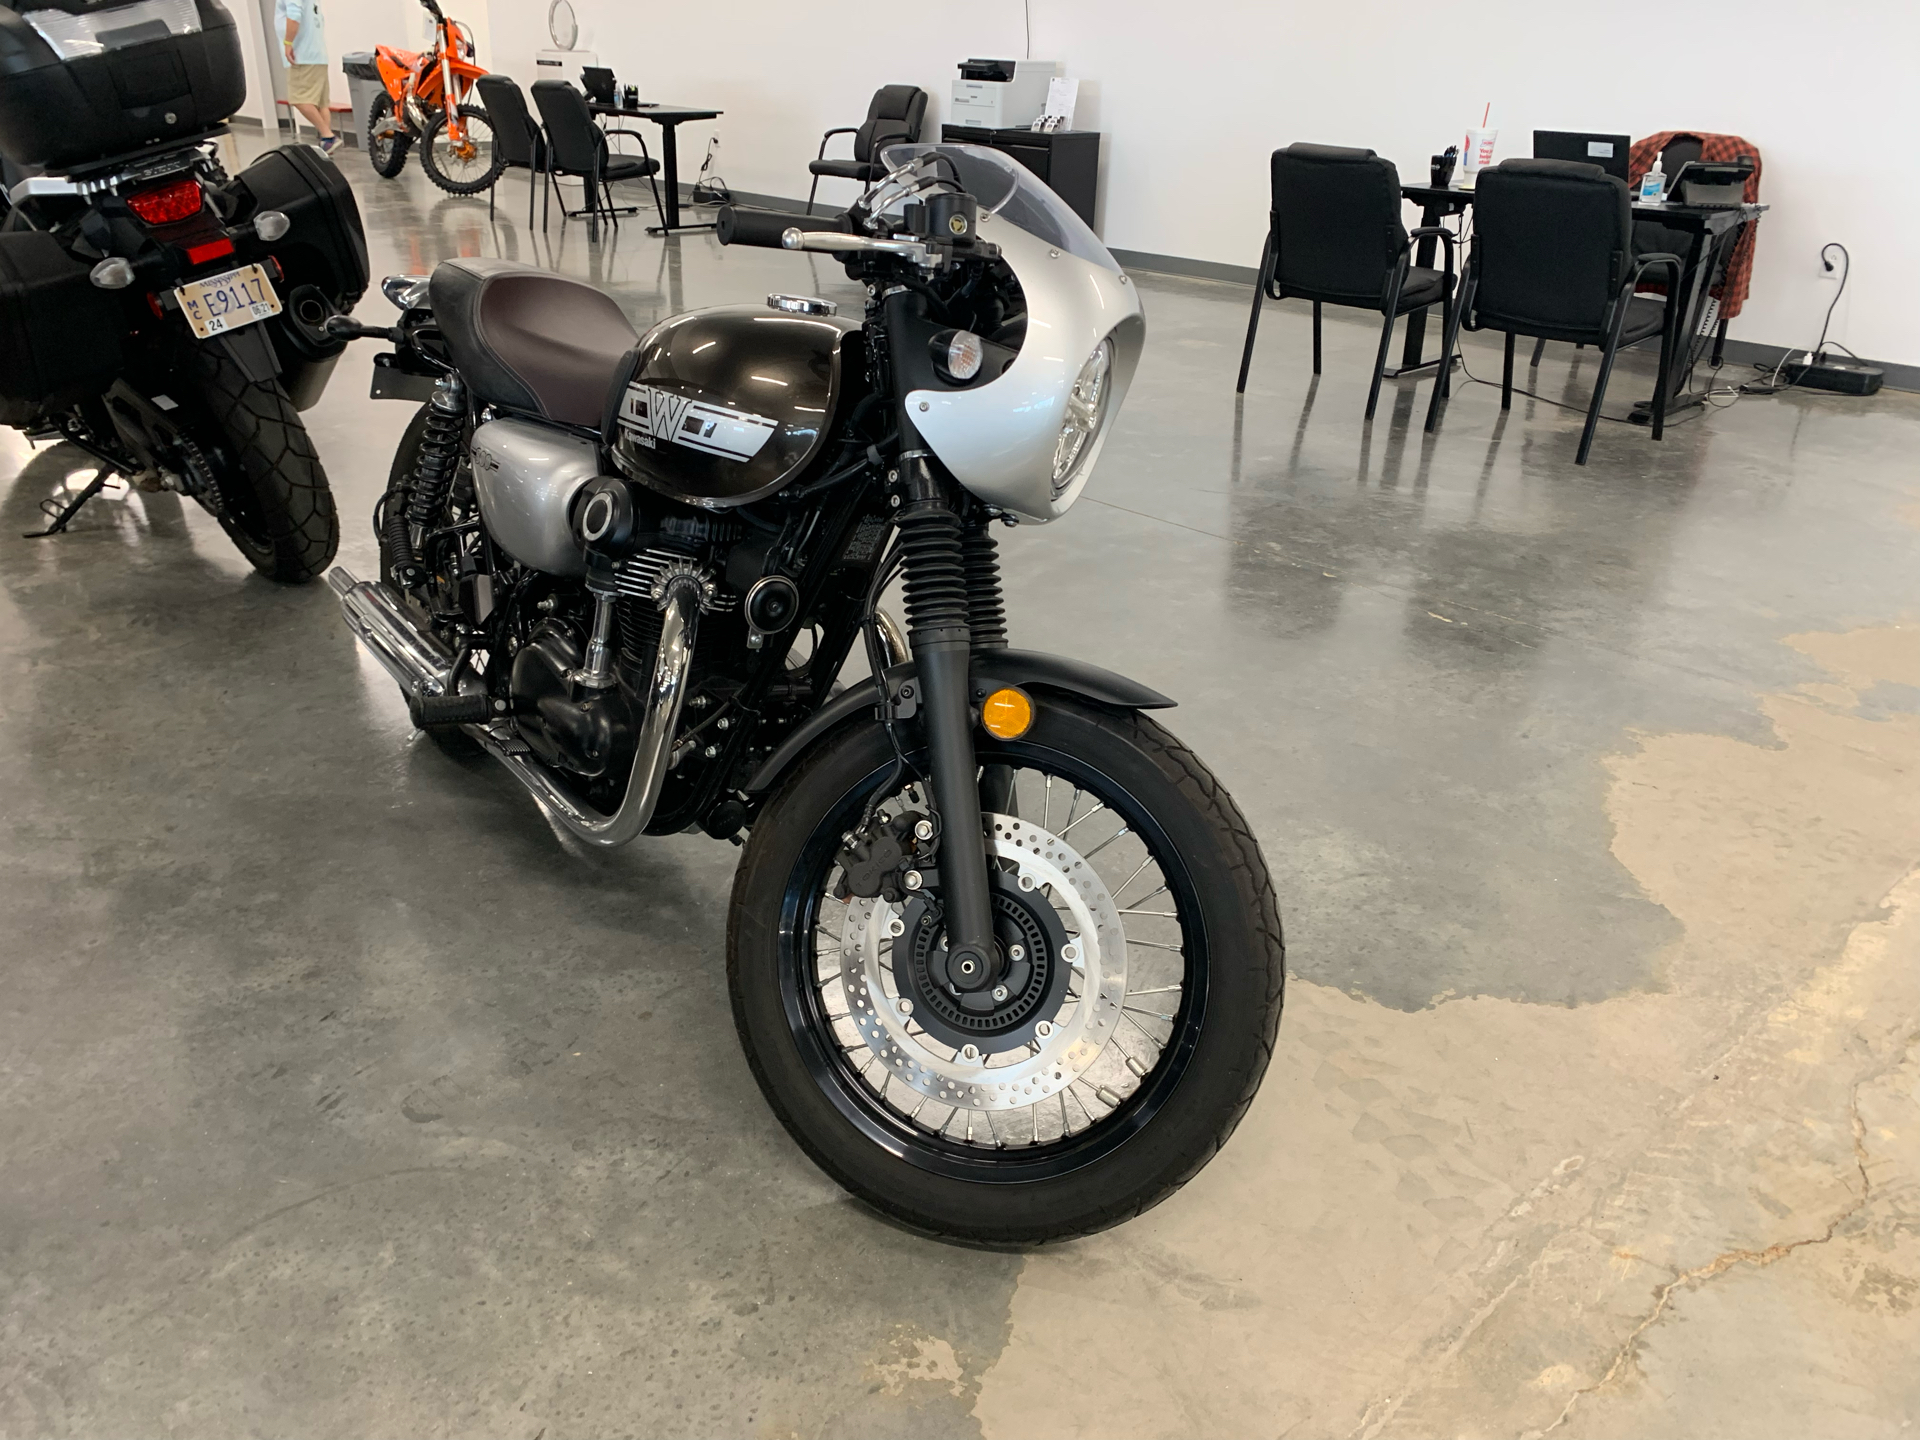 2019 W800 Cafe W800 Cafe KAW000532 - Click for larger photo